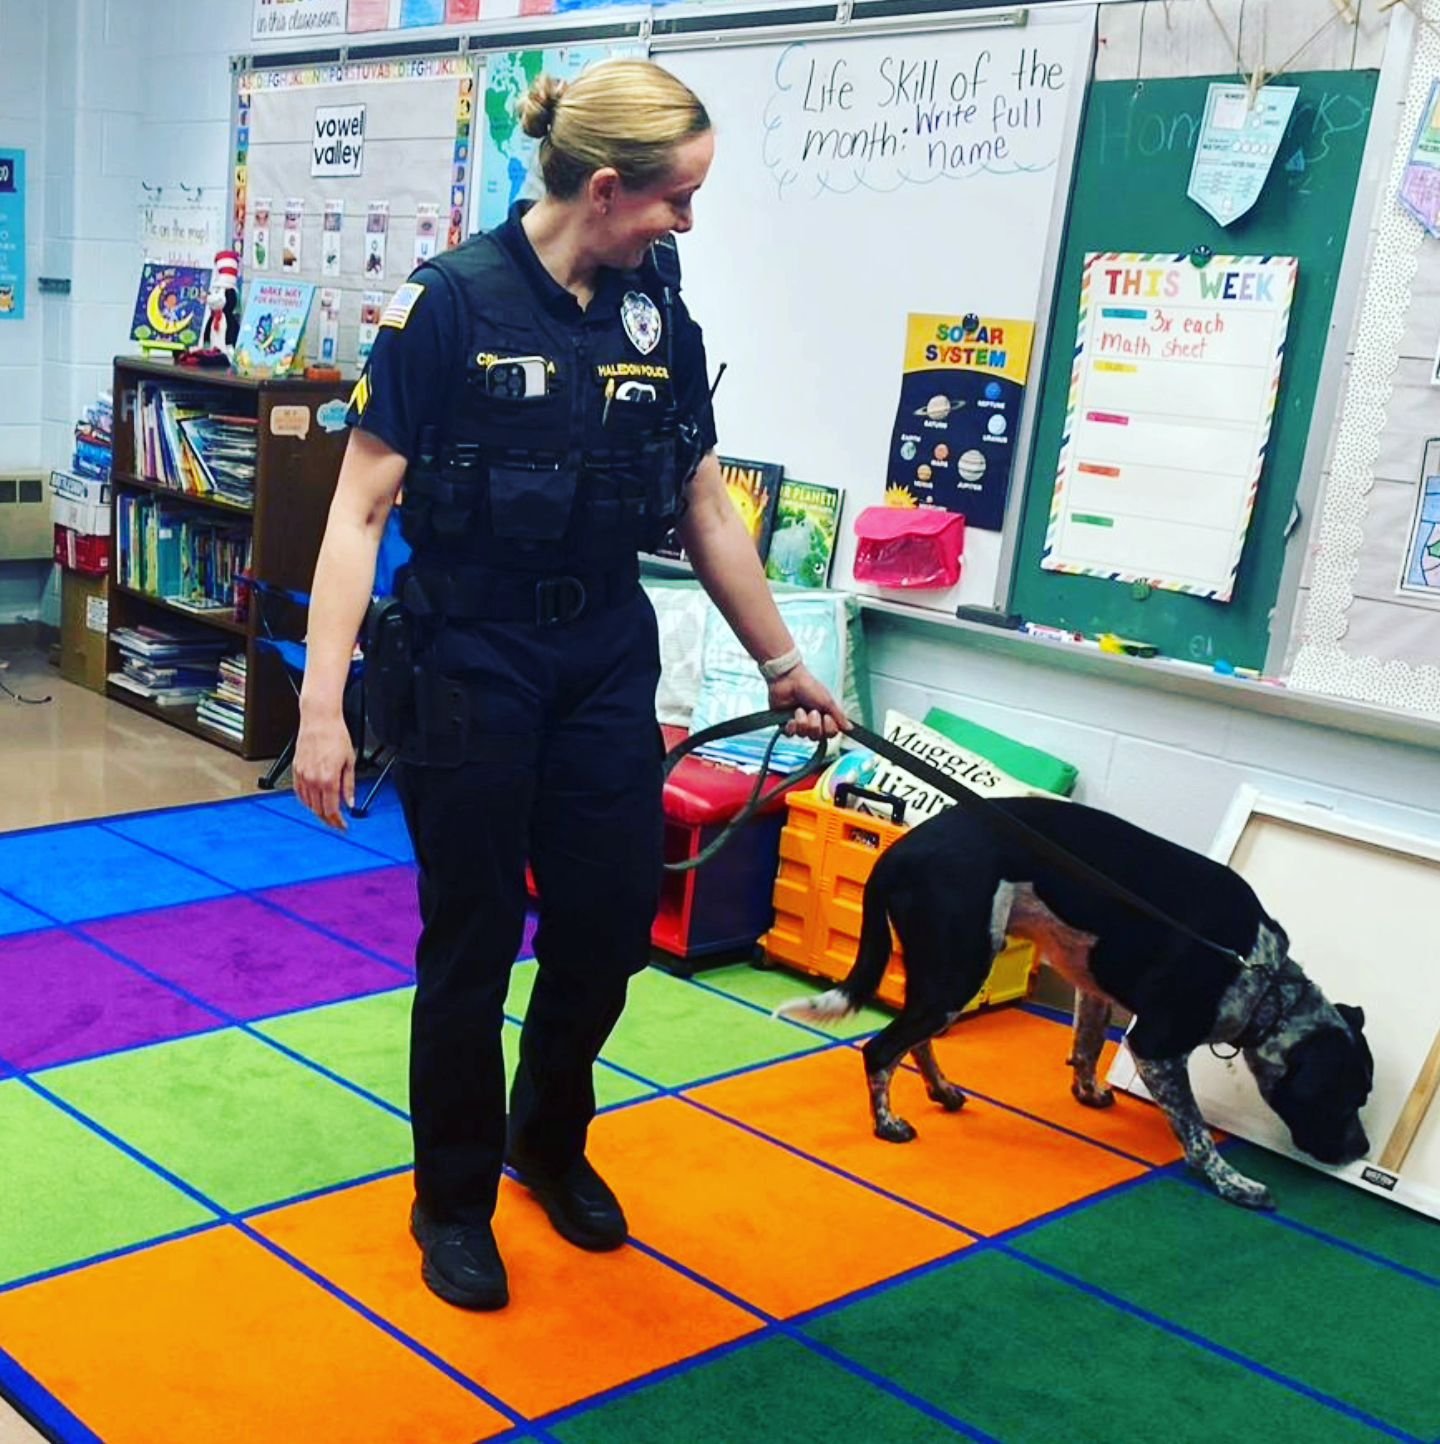 🐾 K-9 Nash and Corporal April Latona from Haledon PD in Action! 🚔

Today, with the assistance of K-9 Nash and Corporal April Latona, Detective/Sergeant Jessica Funes led a valuable L.E.A.D. session at Haledon Public School. 📚👮&zwj;♀️

Through the